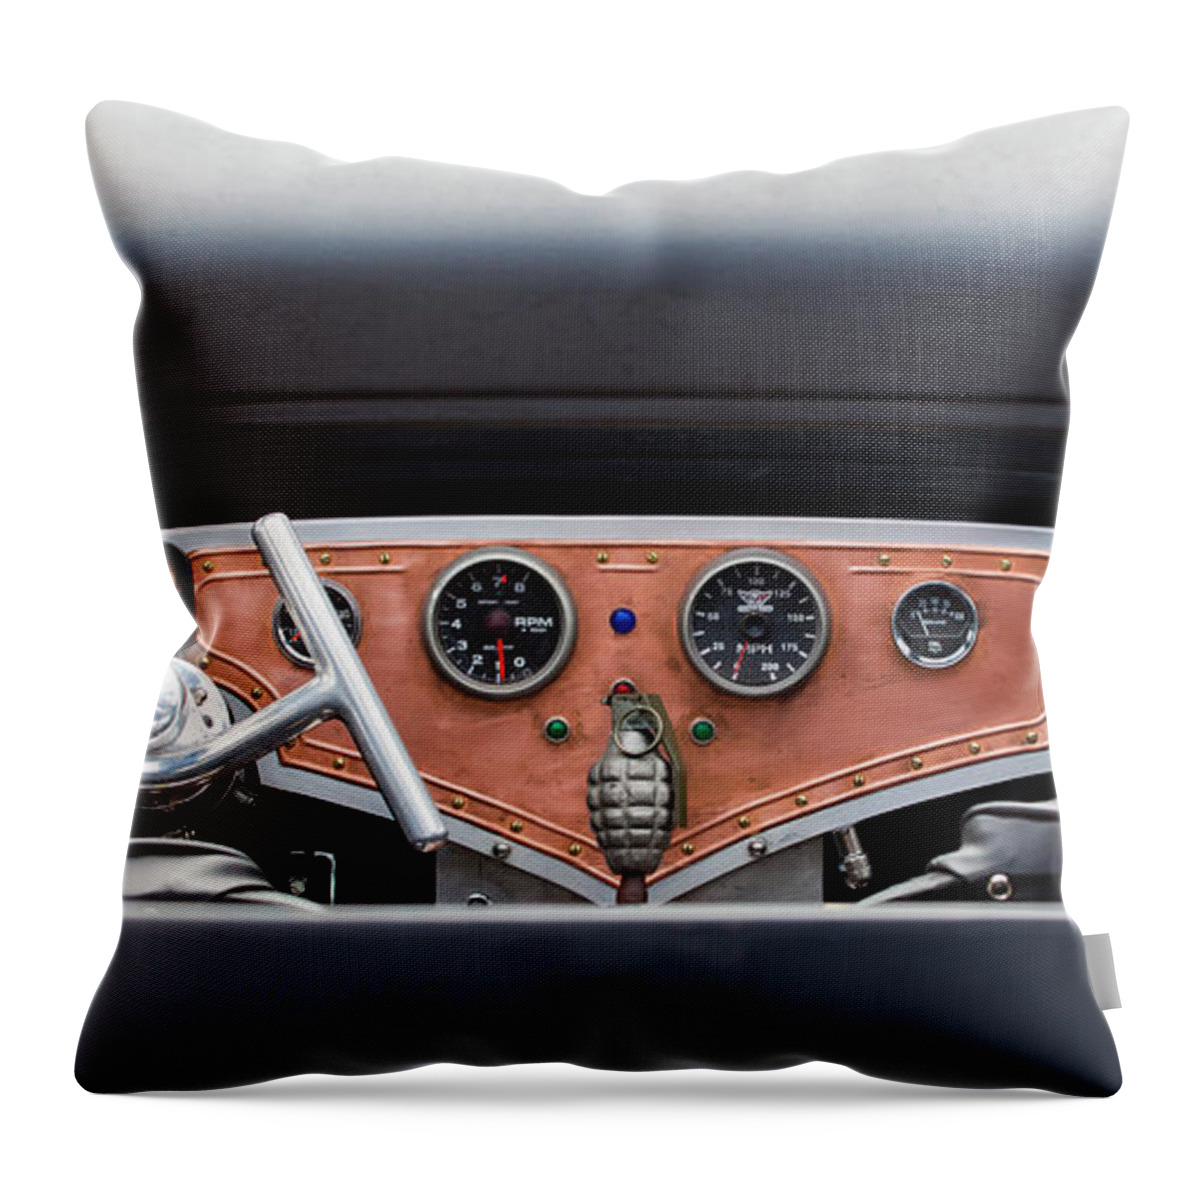 Funny Car Throw Pillow featuring the photograph Funny Car Dash by Chris Dutton